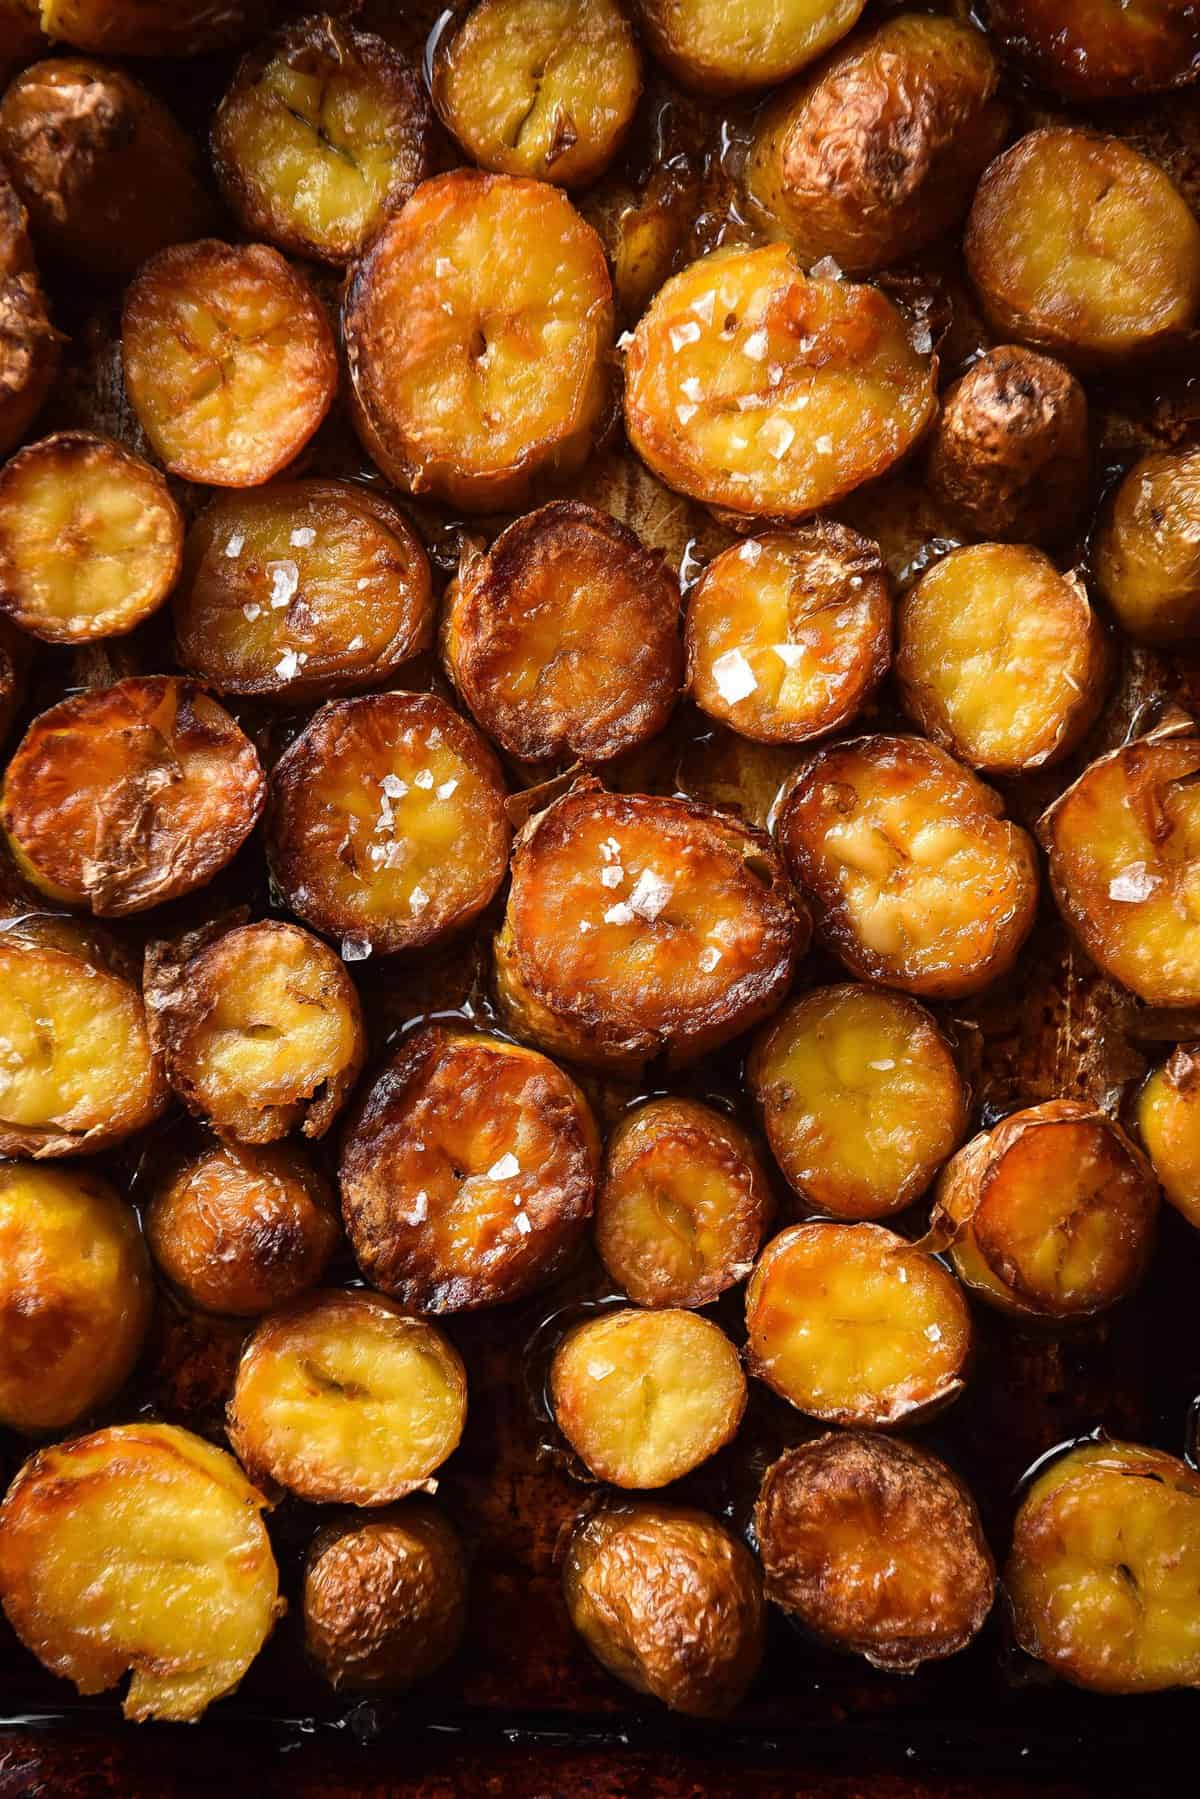 An aerial moody image of salt and vinegar roasted potatoes on a black baking tray. The potato slices are golden brown and topped with sea salt flakes